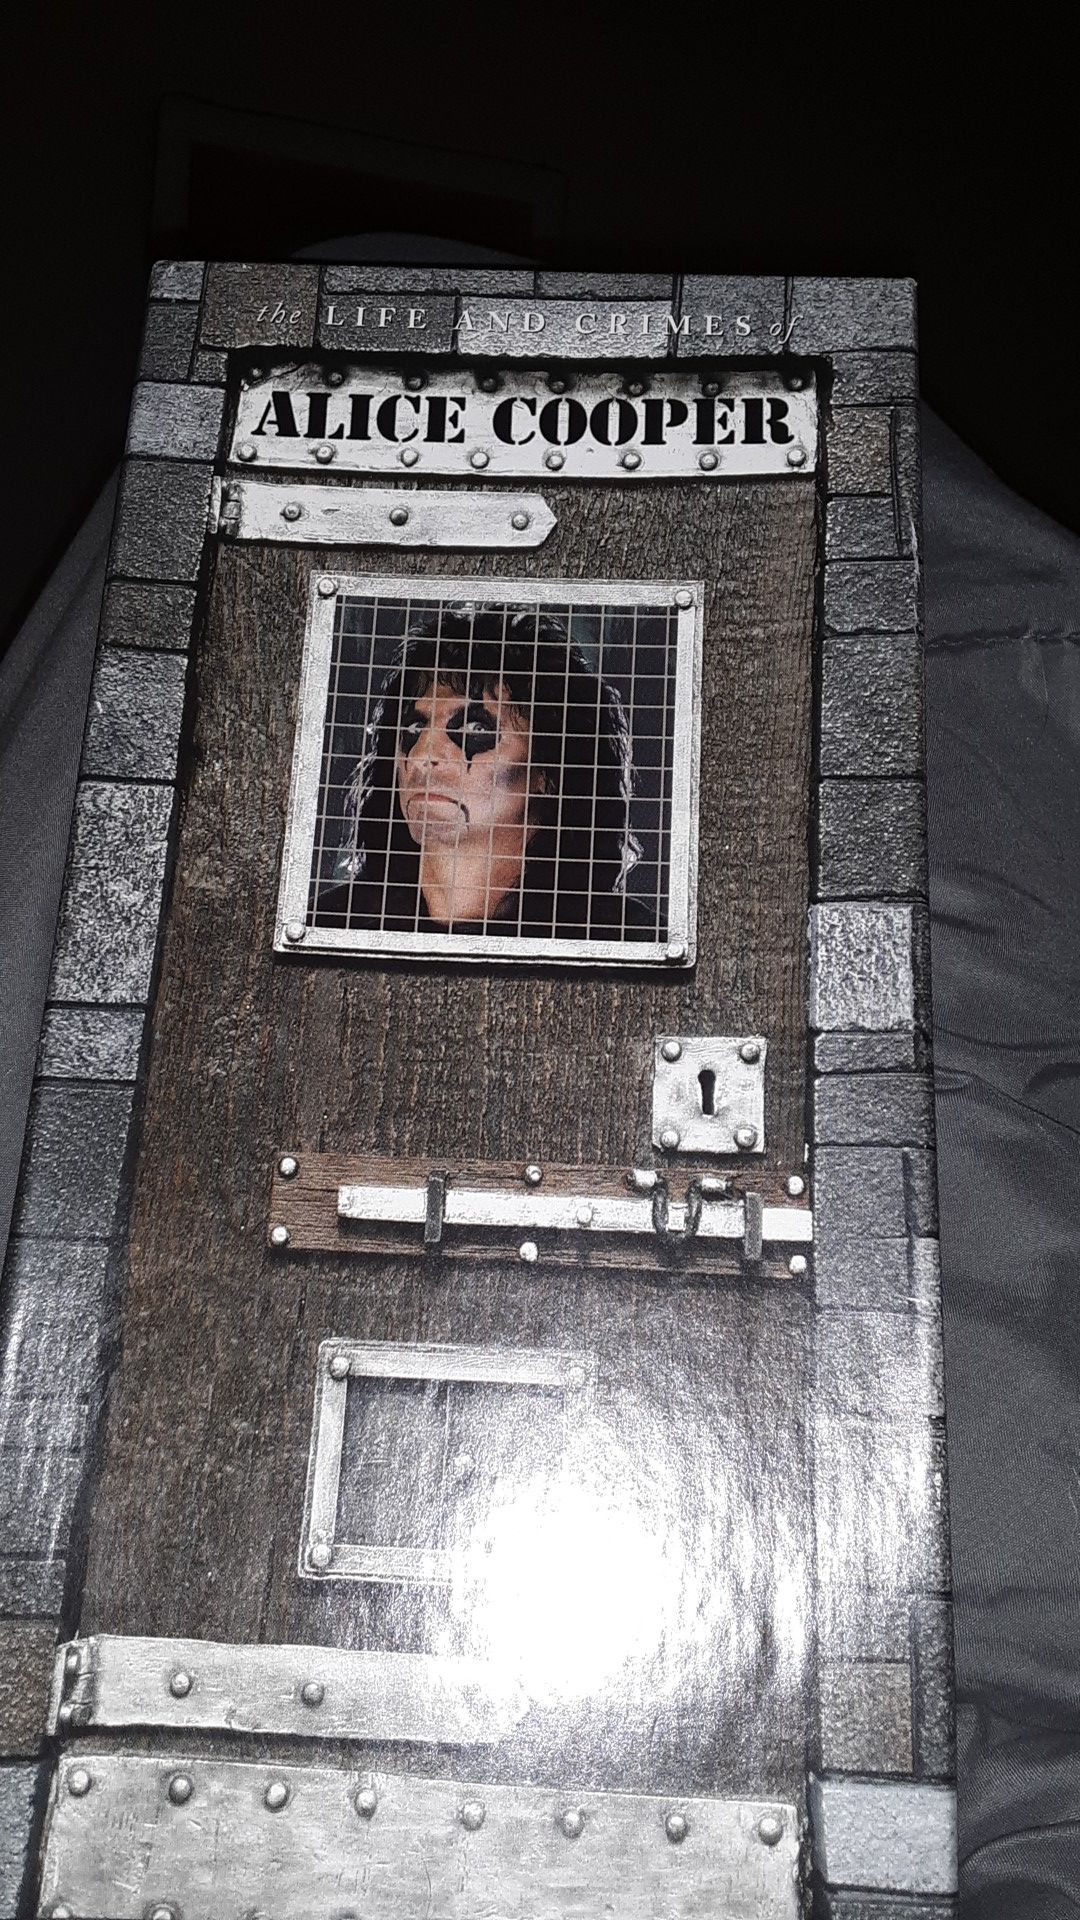 Alice cooper 4 disk collector edition